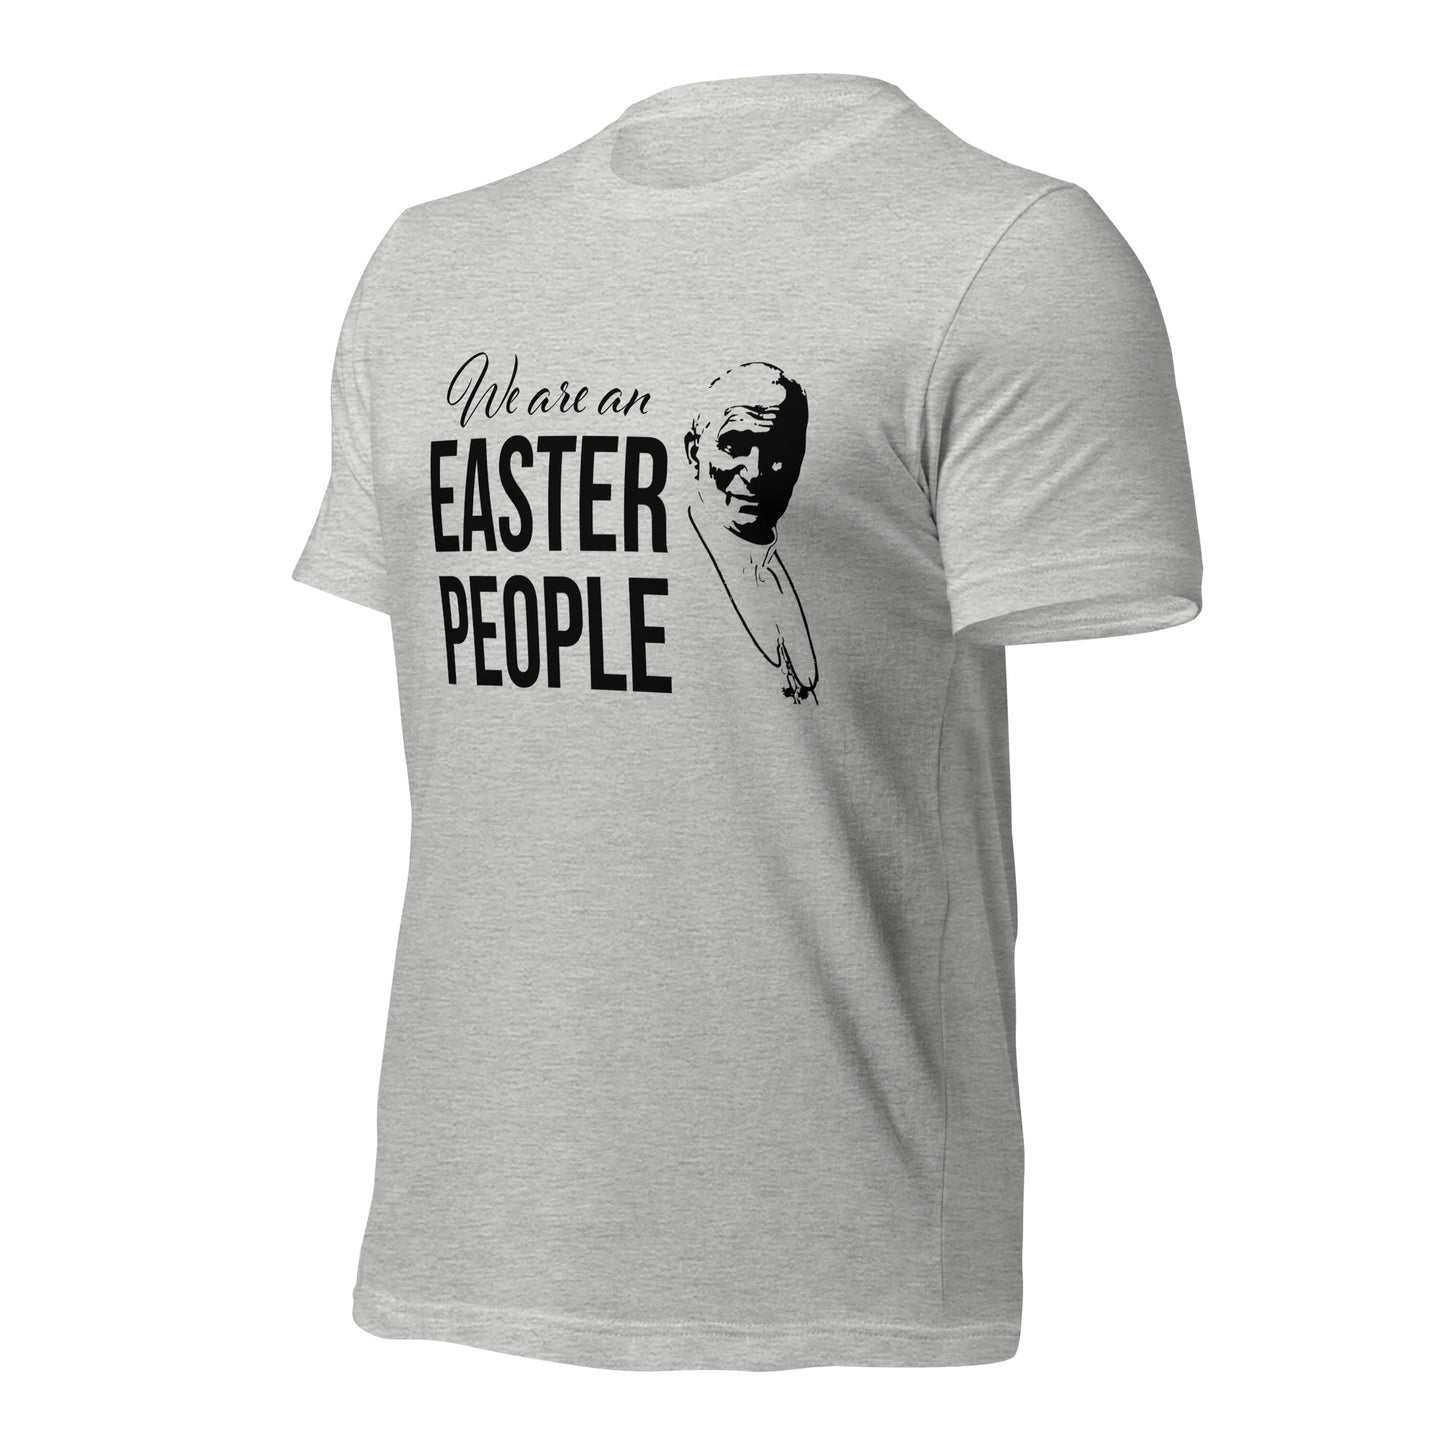 "Easter People" — Unisex t-shirt